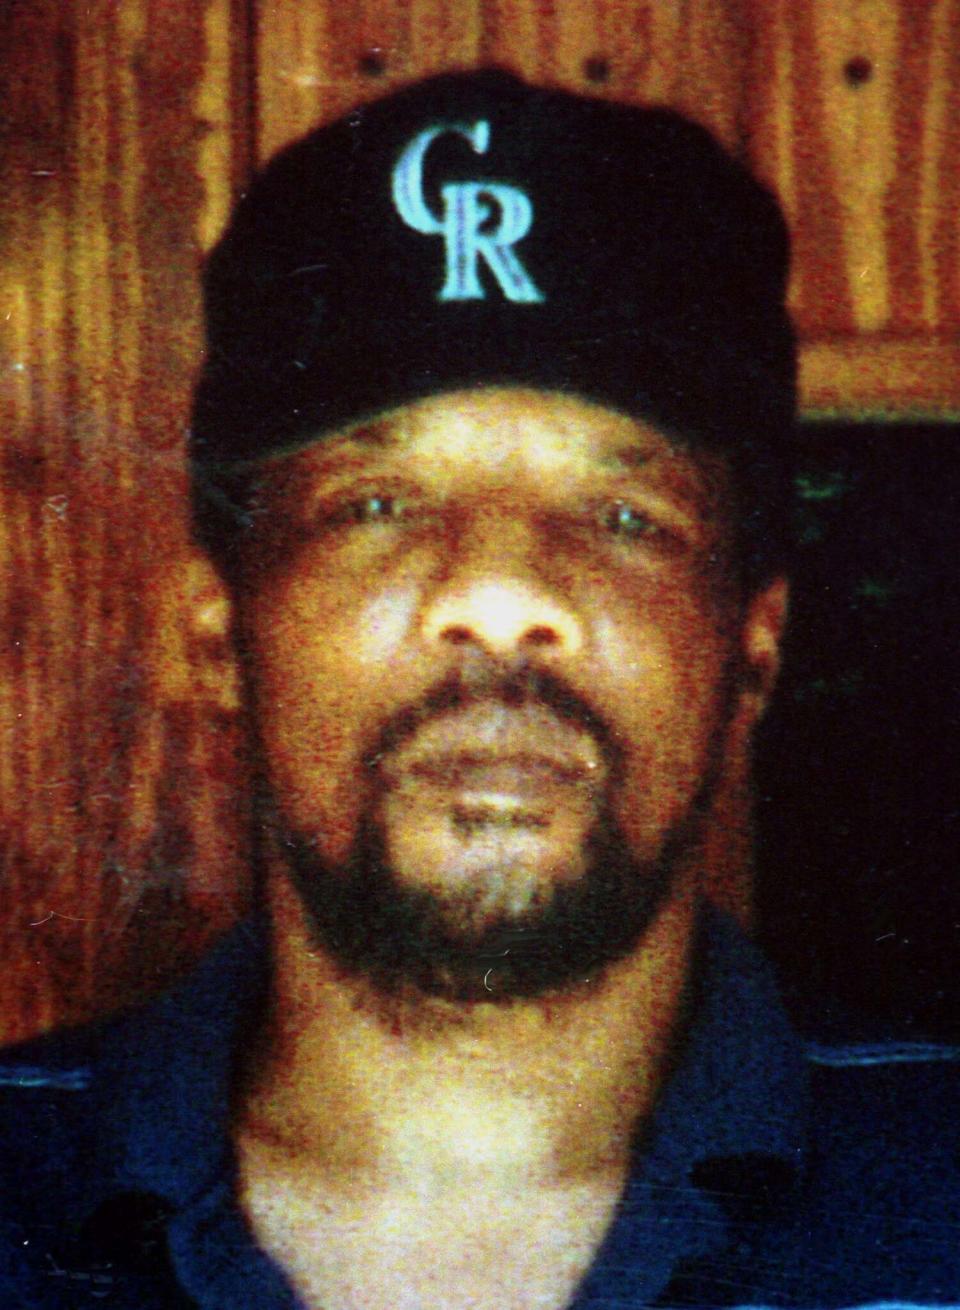 UNDATED PHOTO - Undated family photo of James Byrd, Jr. Byrd was murdered in Jasper, Texas in the early hours of June 7. Prosecutors scrambled on June 10 to build a death penalty case for three white supremacists charged with chaining him to a pickup truck and dragging him down a road until his head was torn off.    DCA